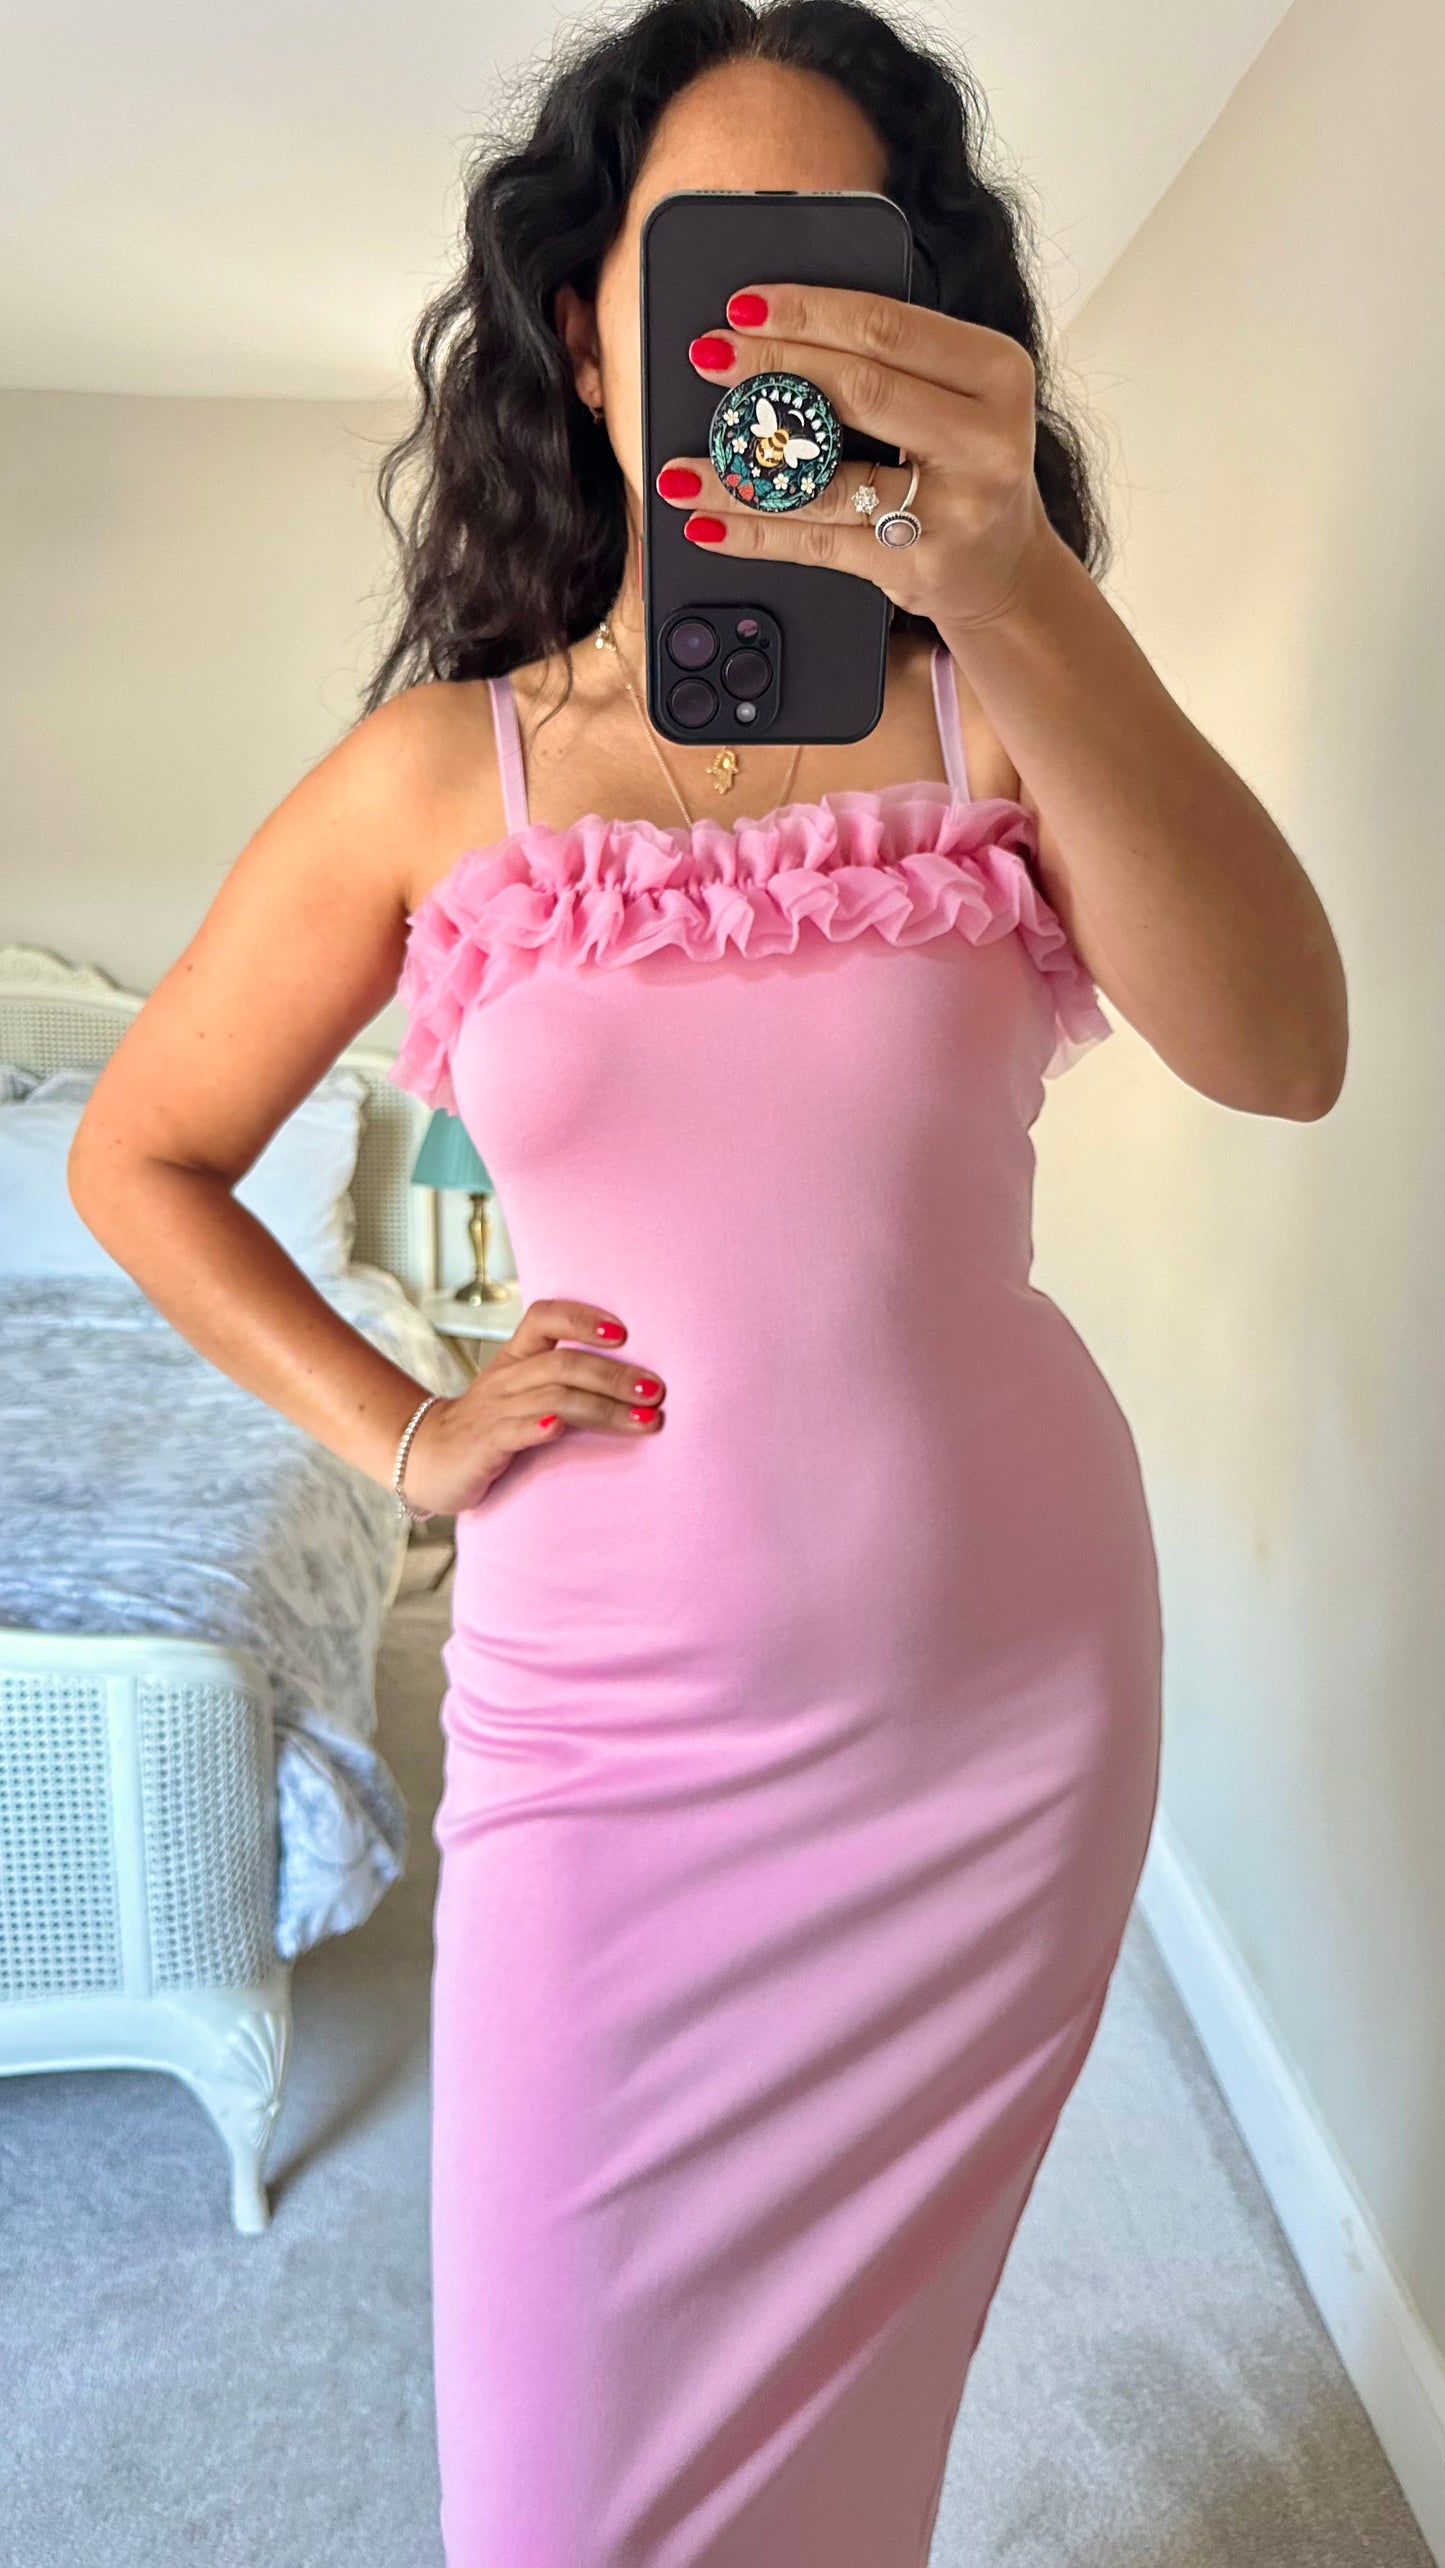 & other stories rose candy soft pink pastel midi body con dress tulle small UK 8 10 new